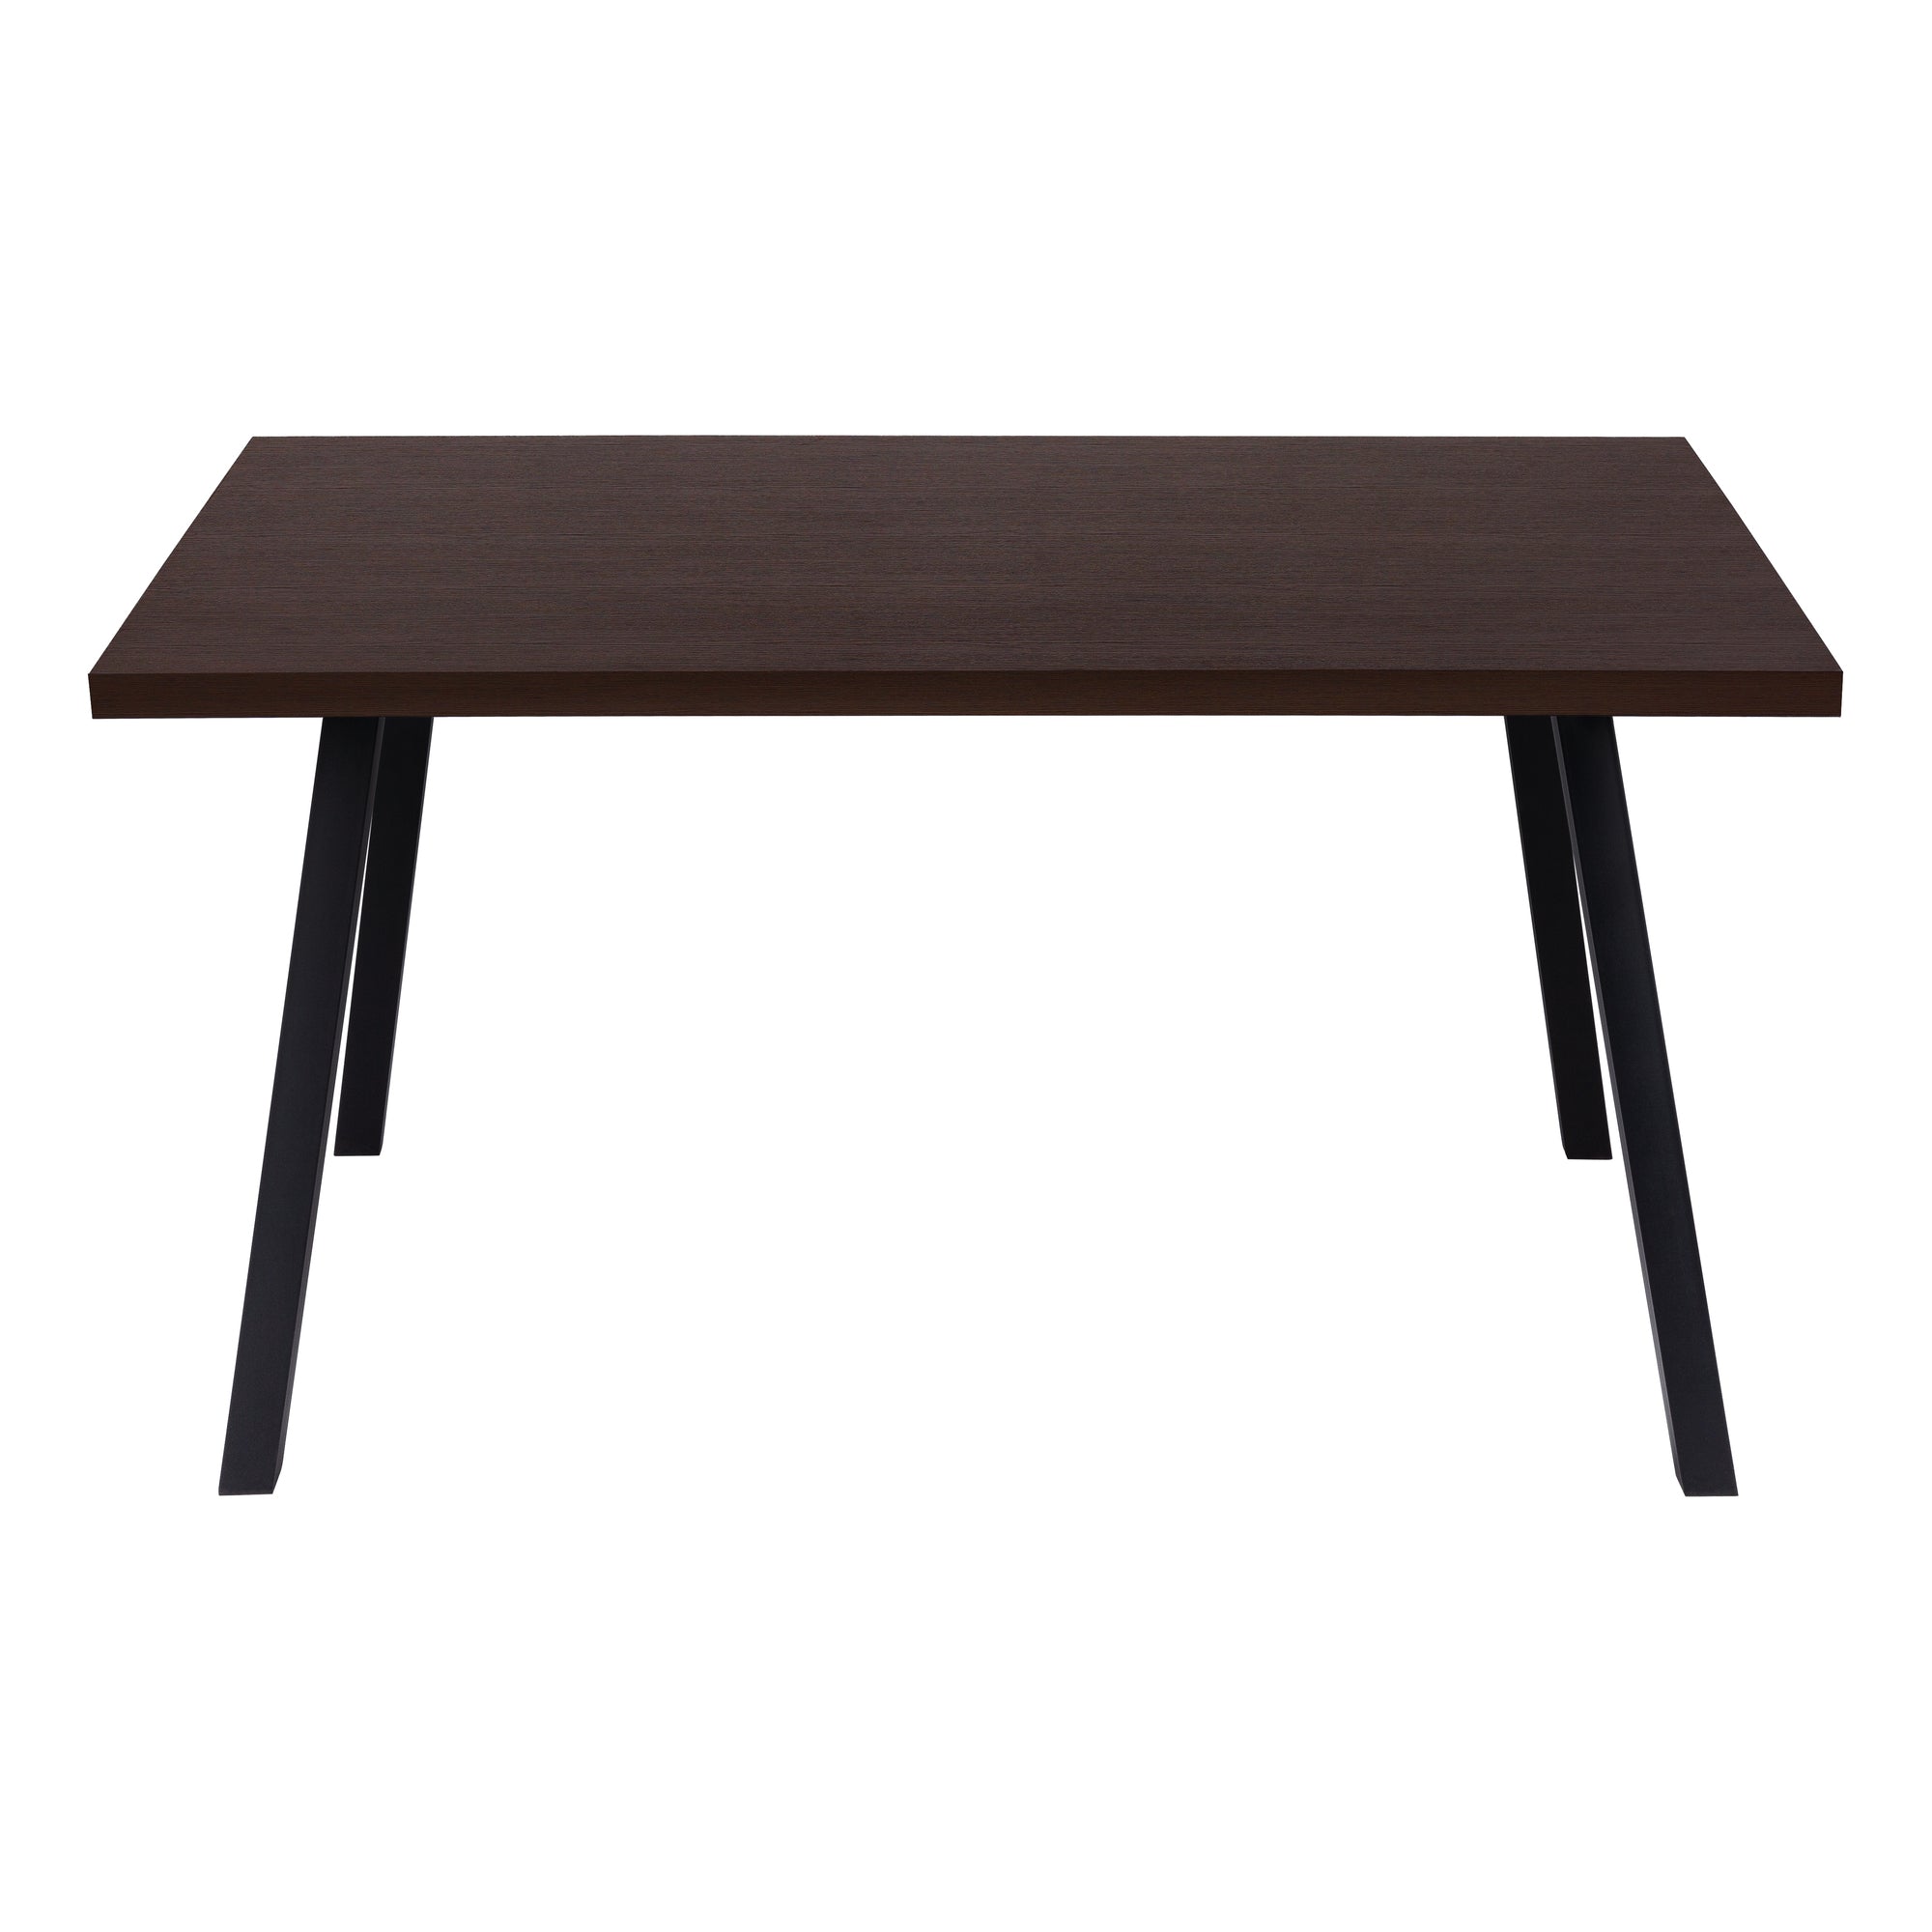 Ember 36" x 60" Dining Table With metal Legs (Espresso)